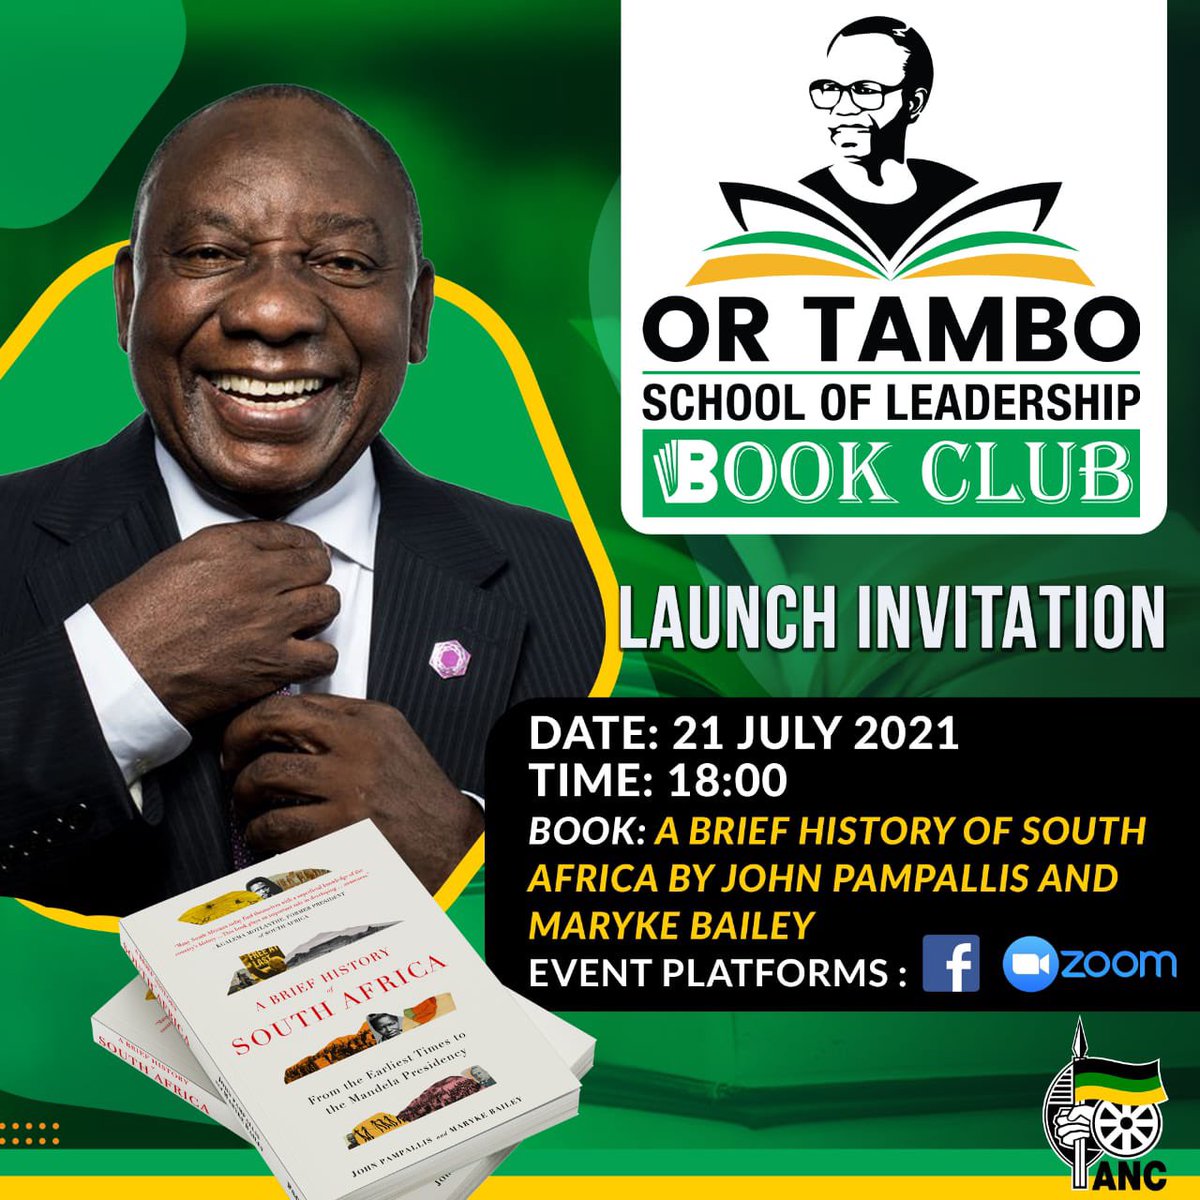 African National Congress on Twitter: "You are cordially invited to the virtual launch of the OR Tambo School Book Club with ANC President Cyril Ramaphosa. Details are as follows: Date: 21 July